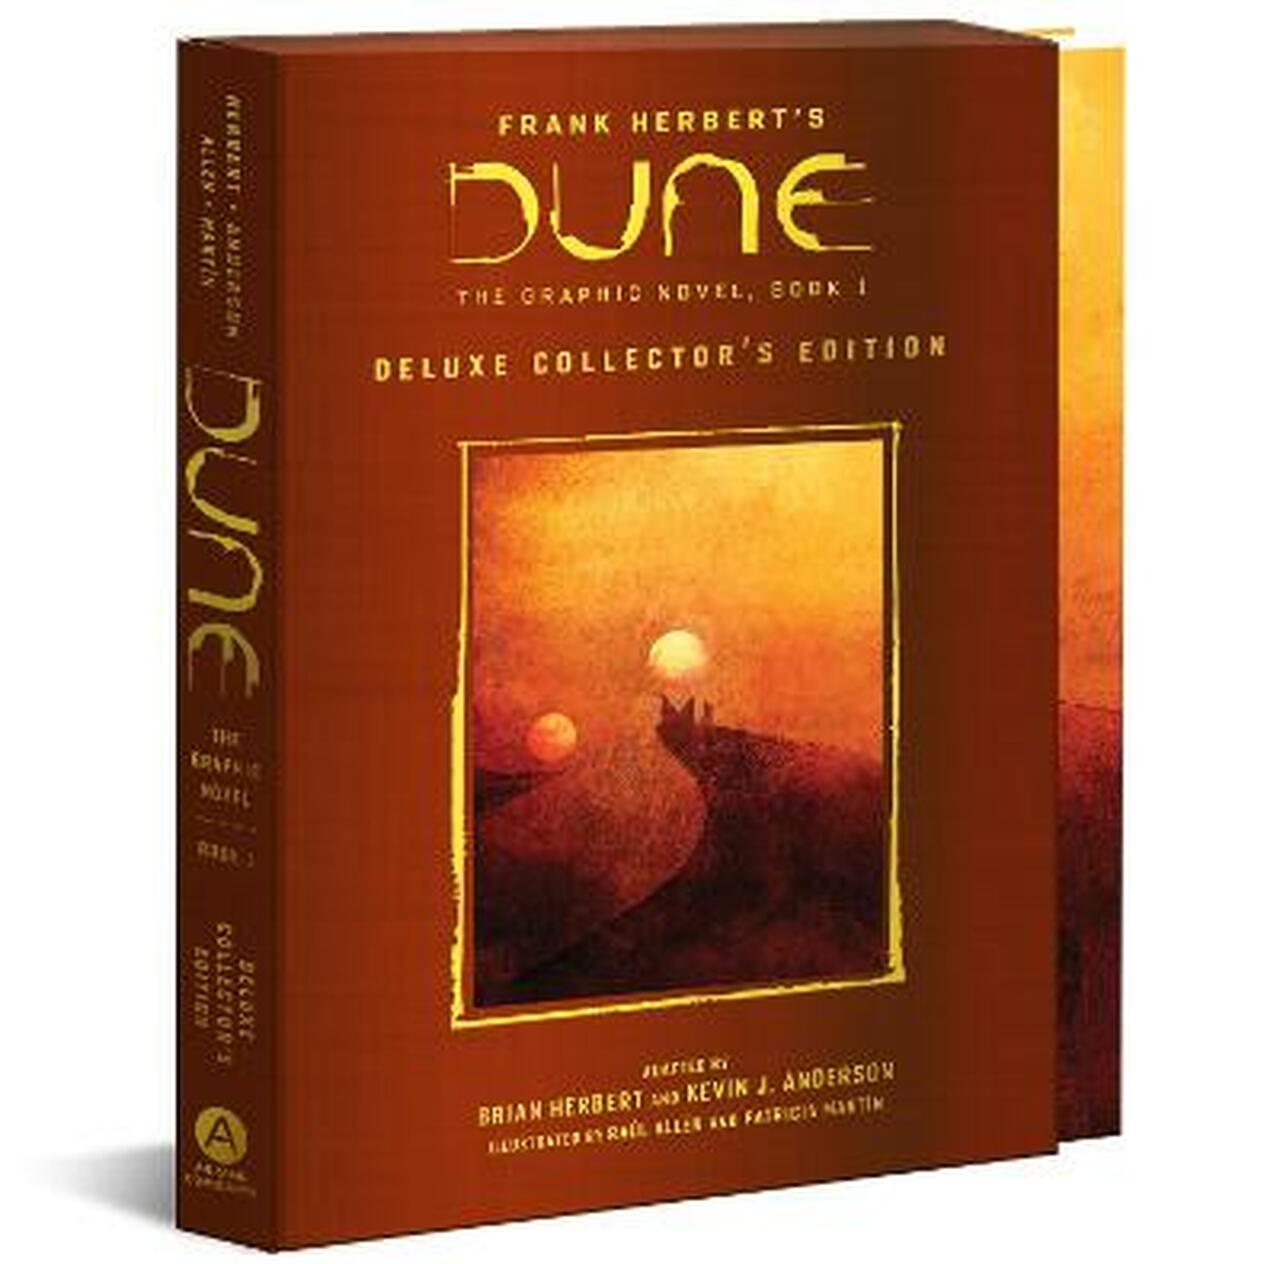 Abrams DUNE: The Graphic Novel, Book 1: Dune Deluxe Collector's Edition